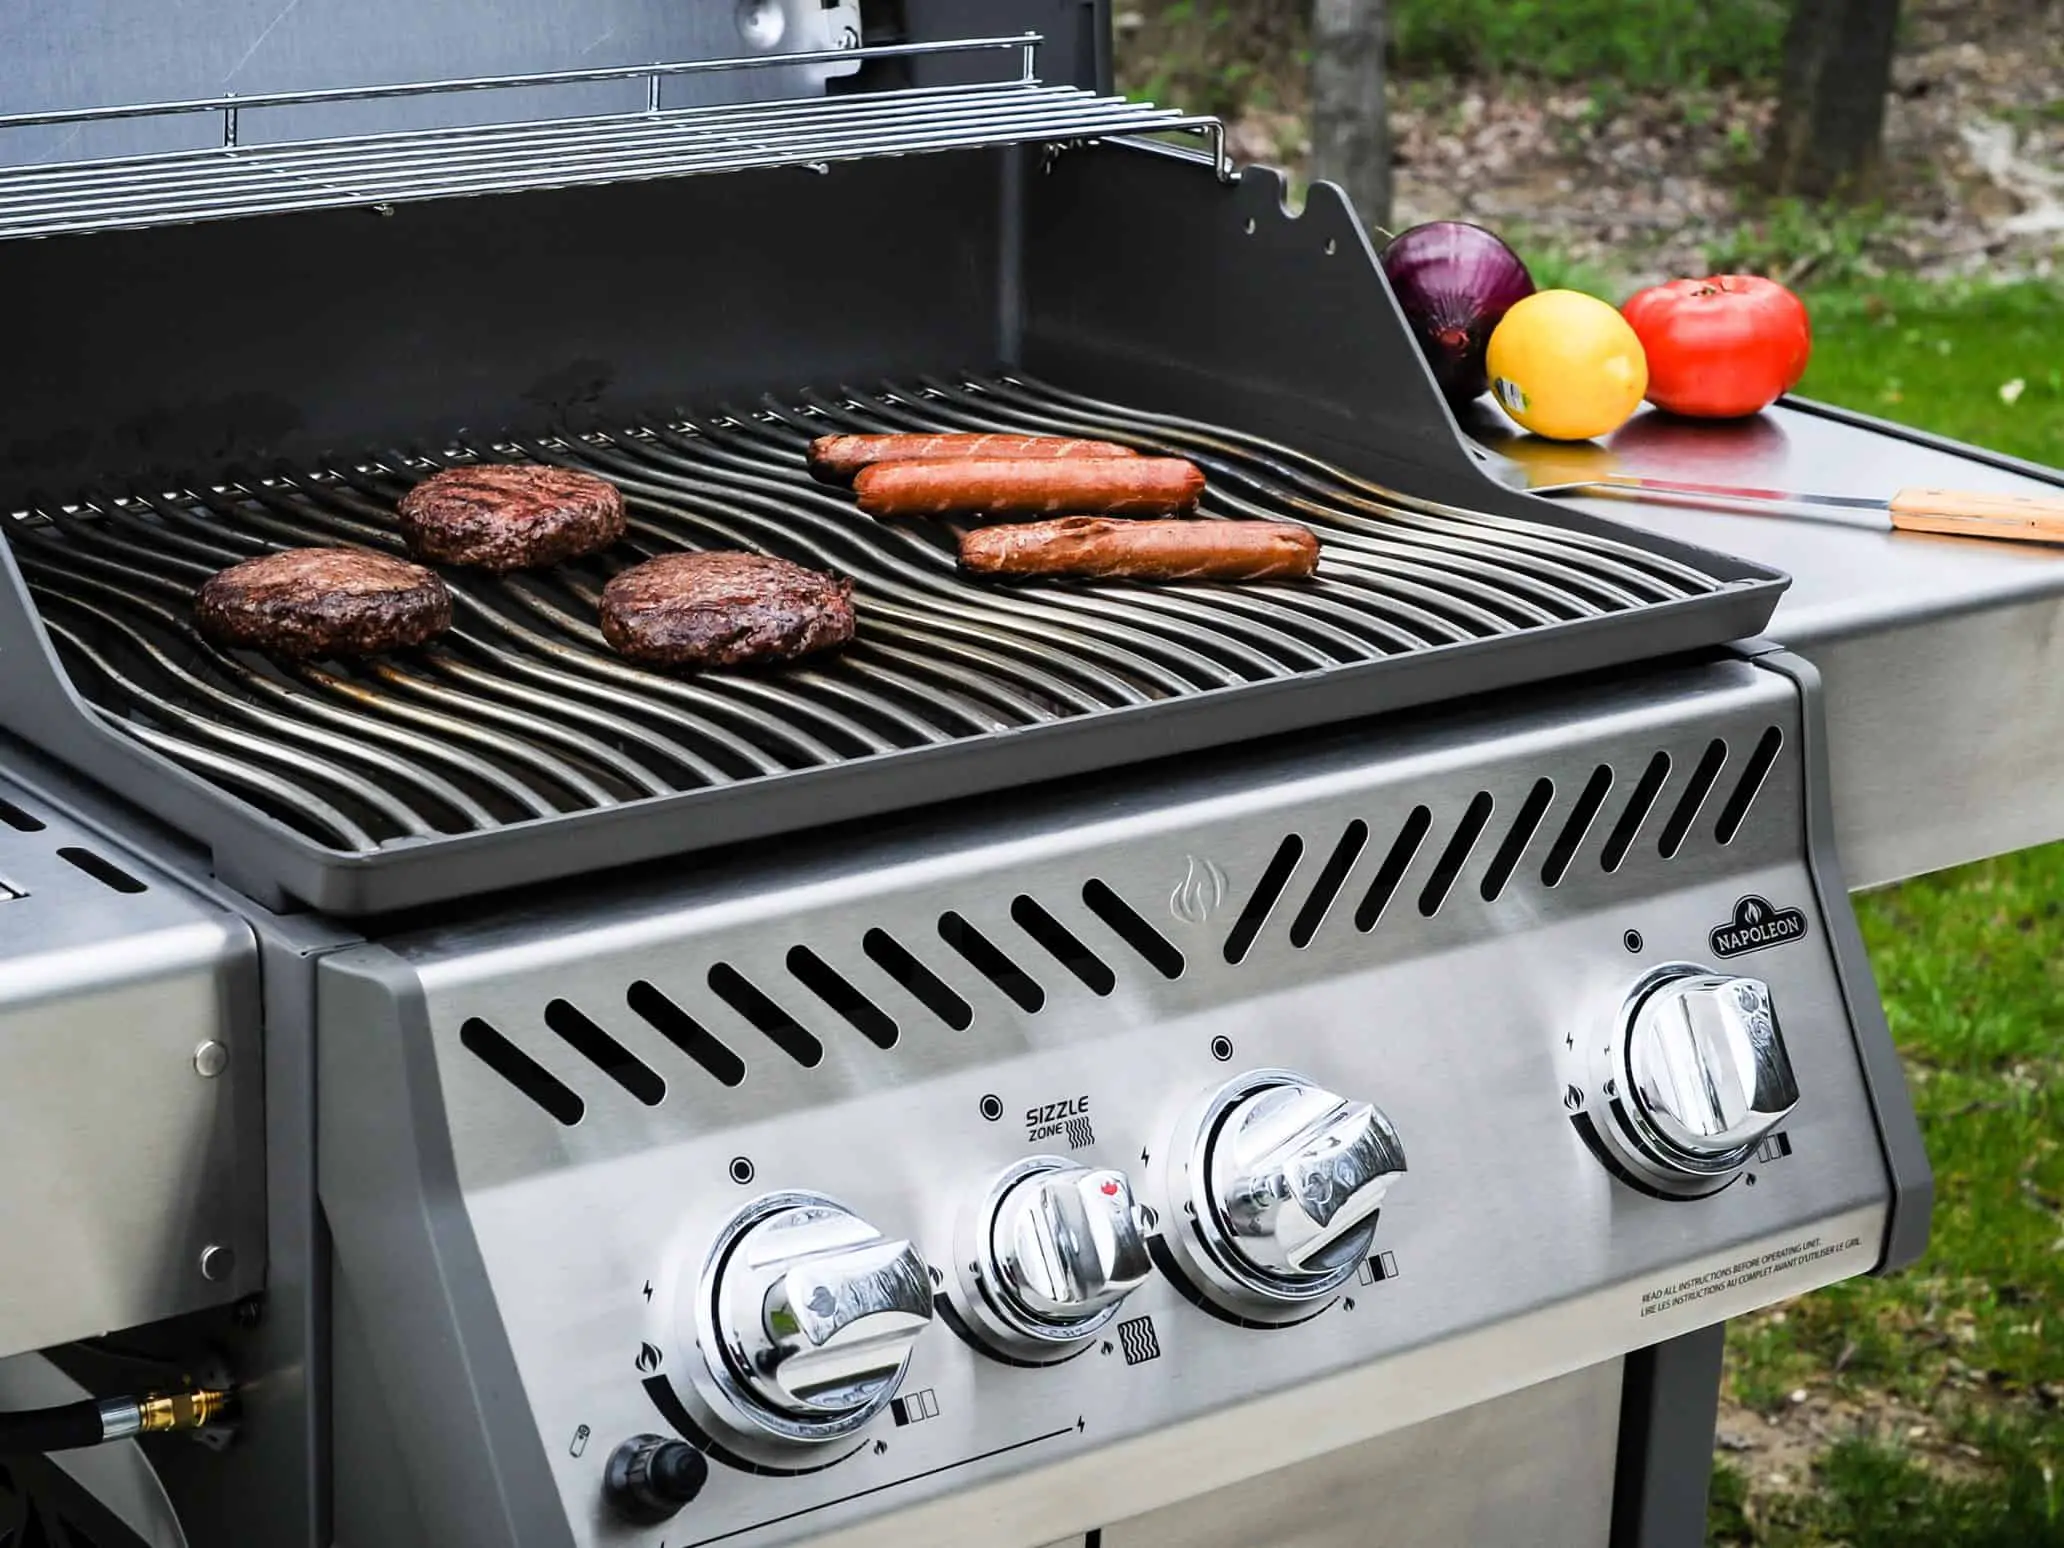 Best Gas Grills For BBQ Reviewed in 2021 ...